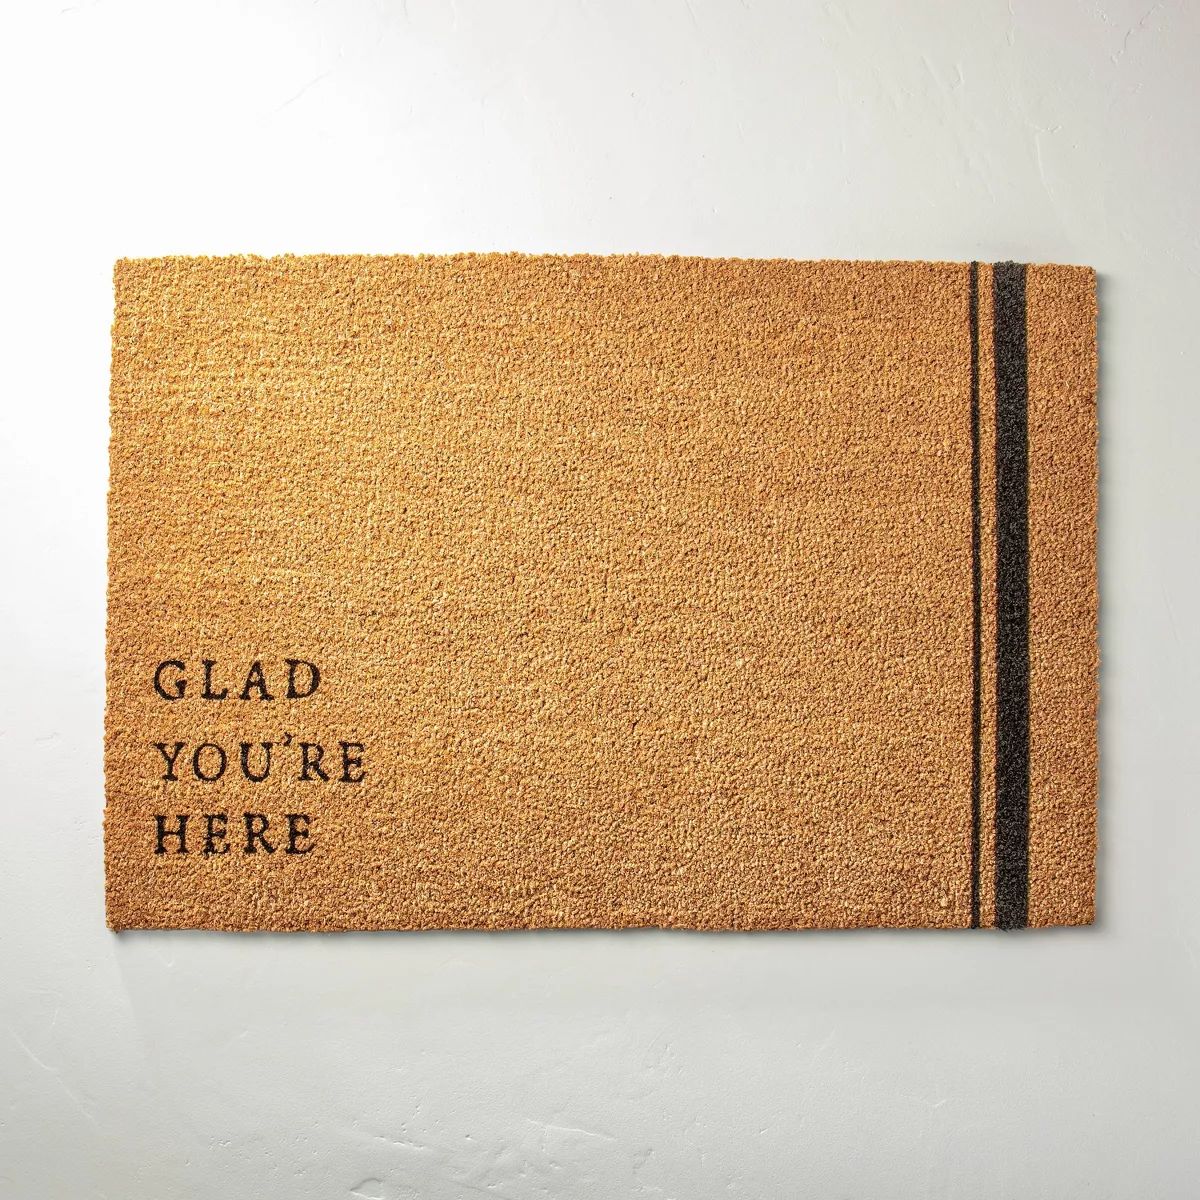 Glad You're Here Coir Doormat Tan/Black - Hearth & Hand™ with Magnolia | Target